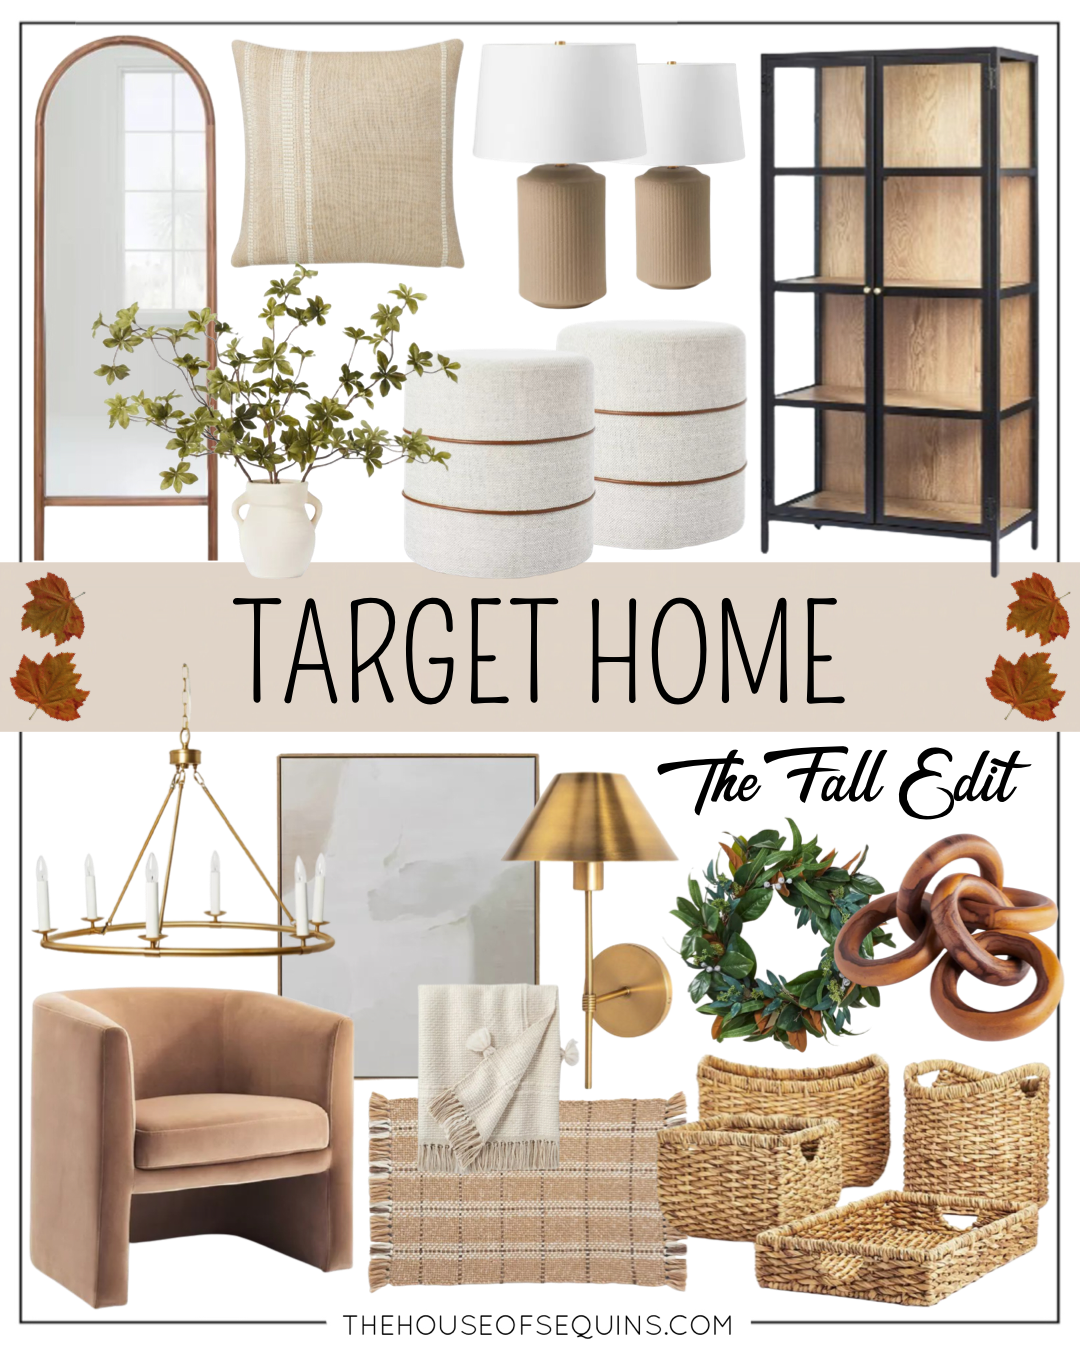 Blogger Sarah Lindner of The House of Sequins sharing Fall decor from Target Home.